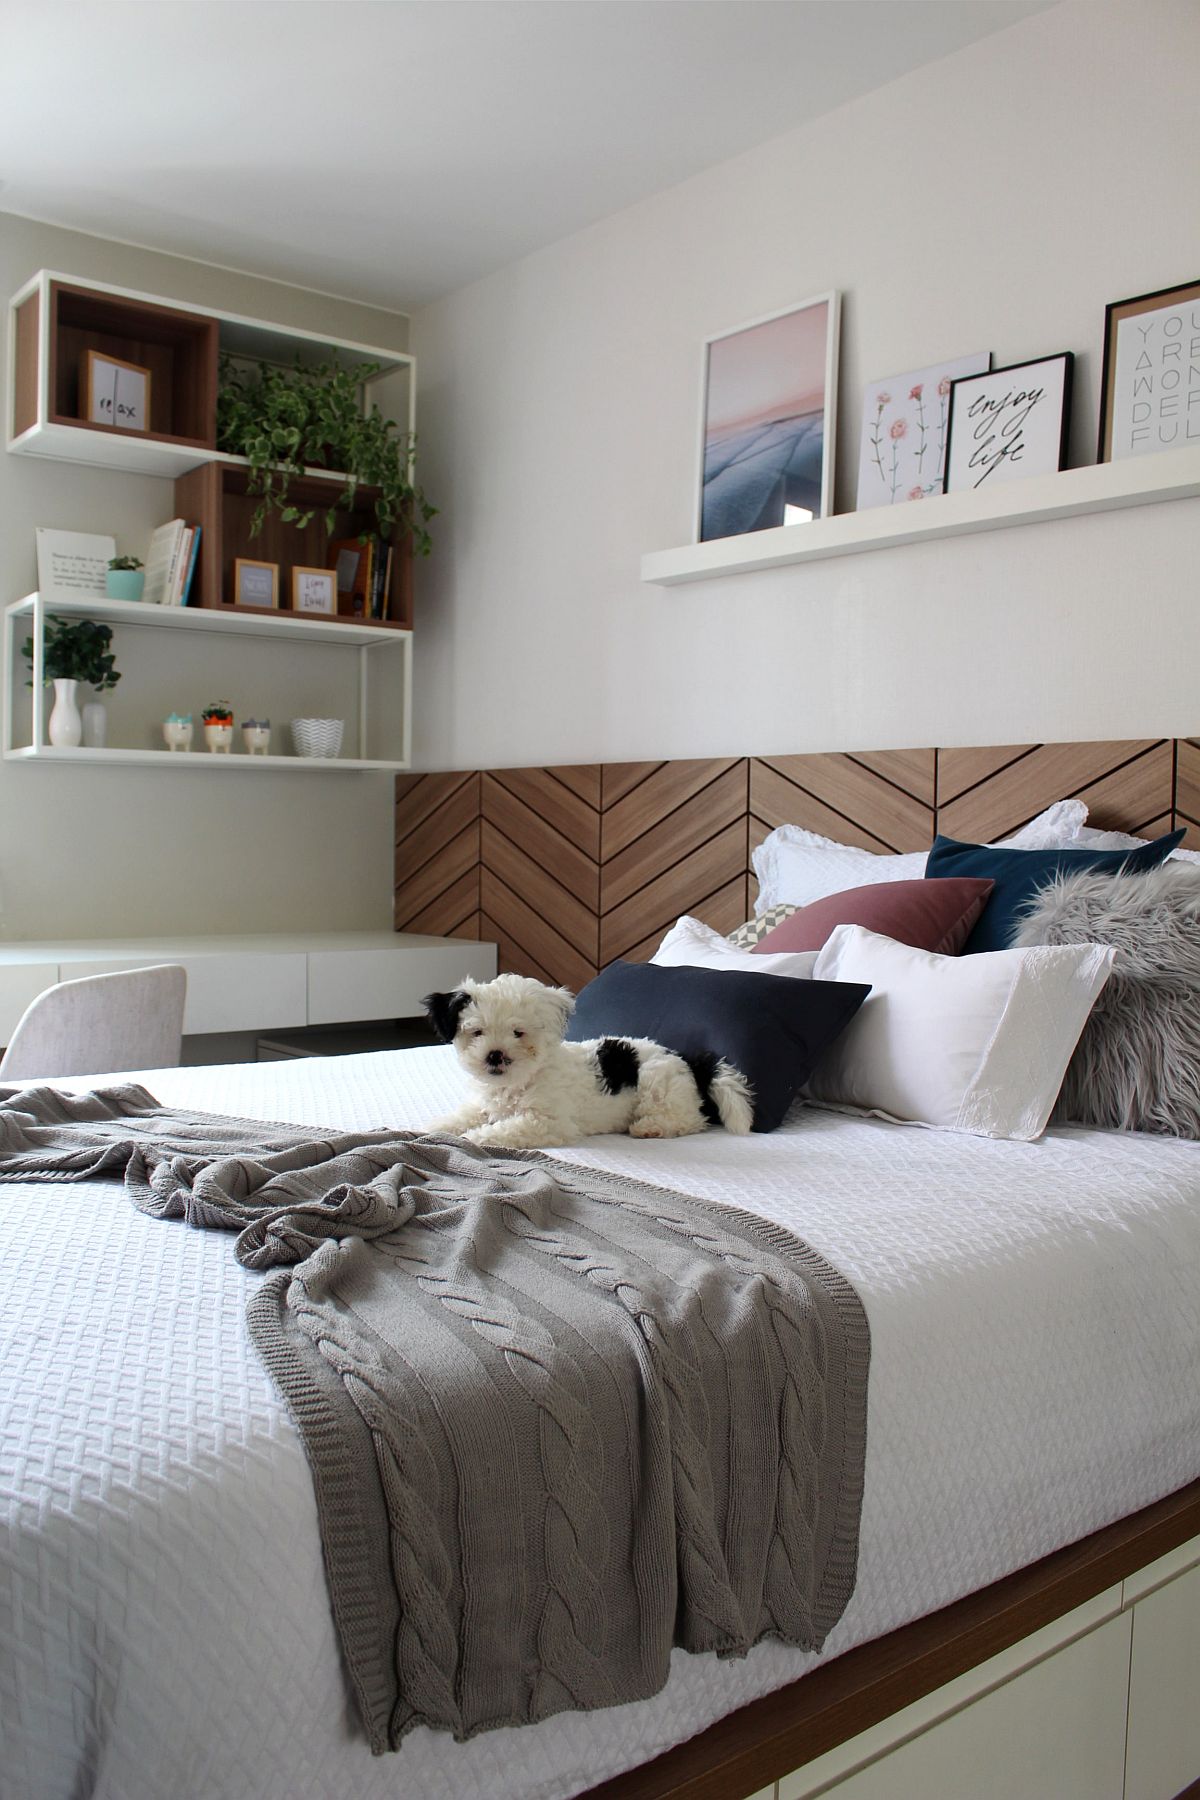 Bela's bedroom in Sudoeste, Brasília with a refined wood and white color scheme